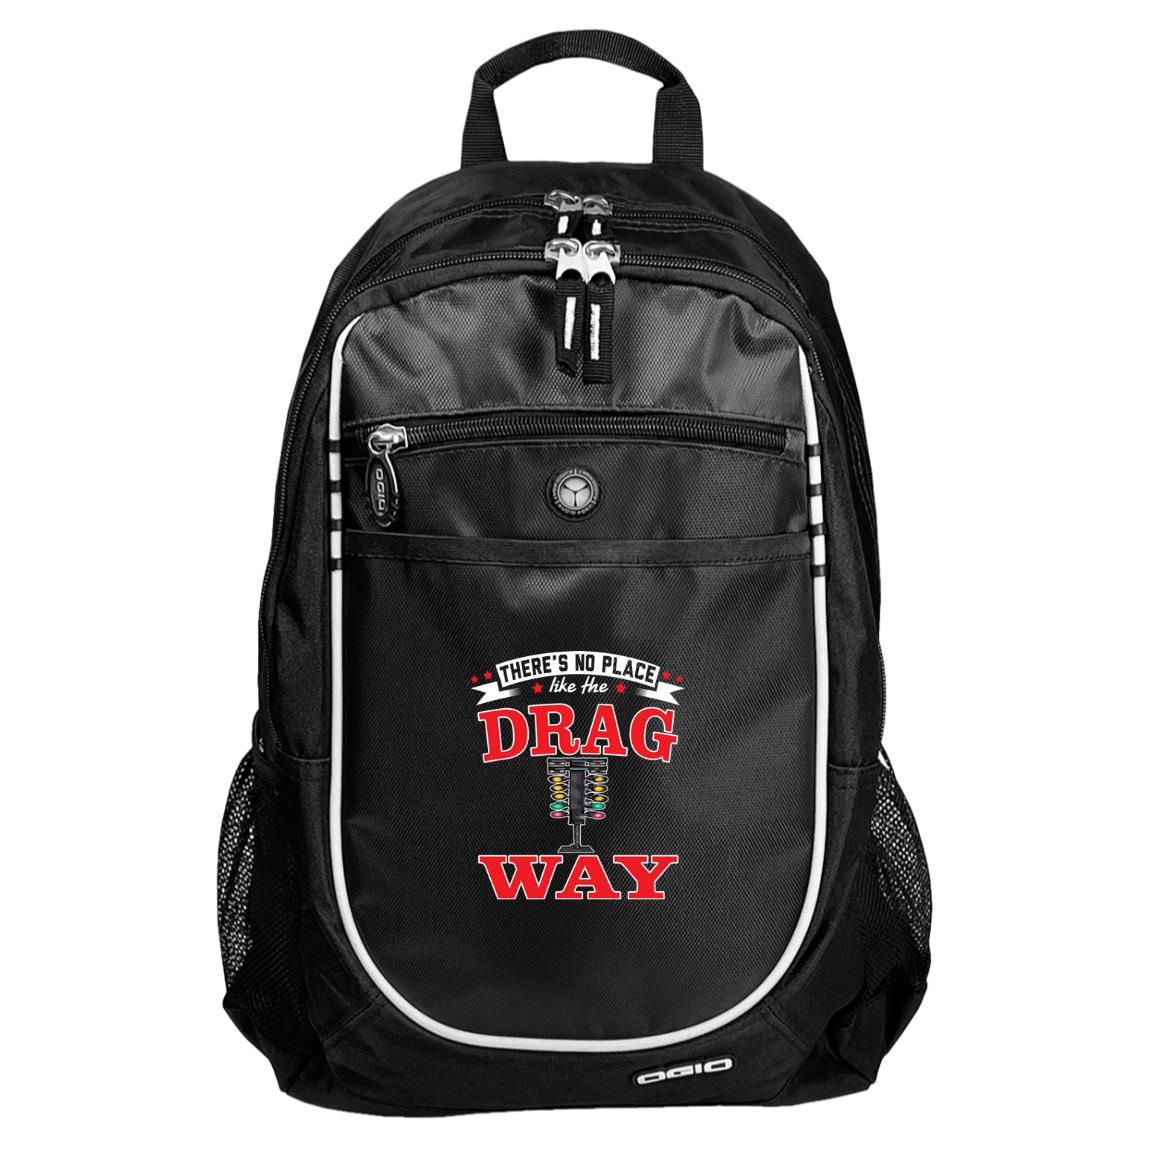 There's No Place Like The Dragway Rugged Bookbag